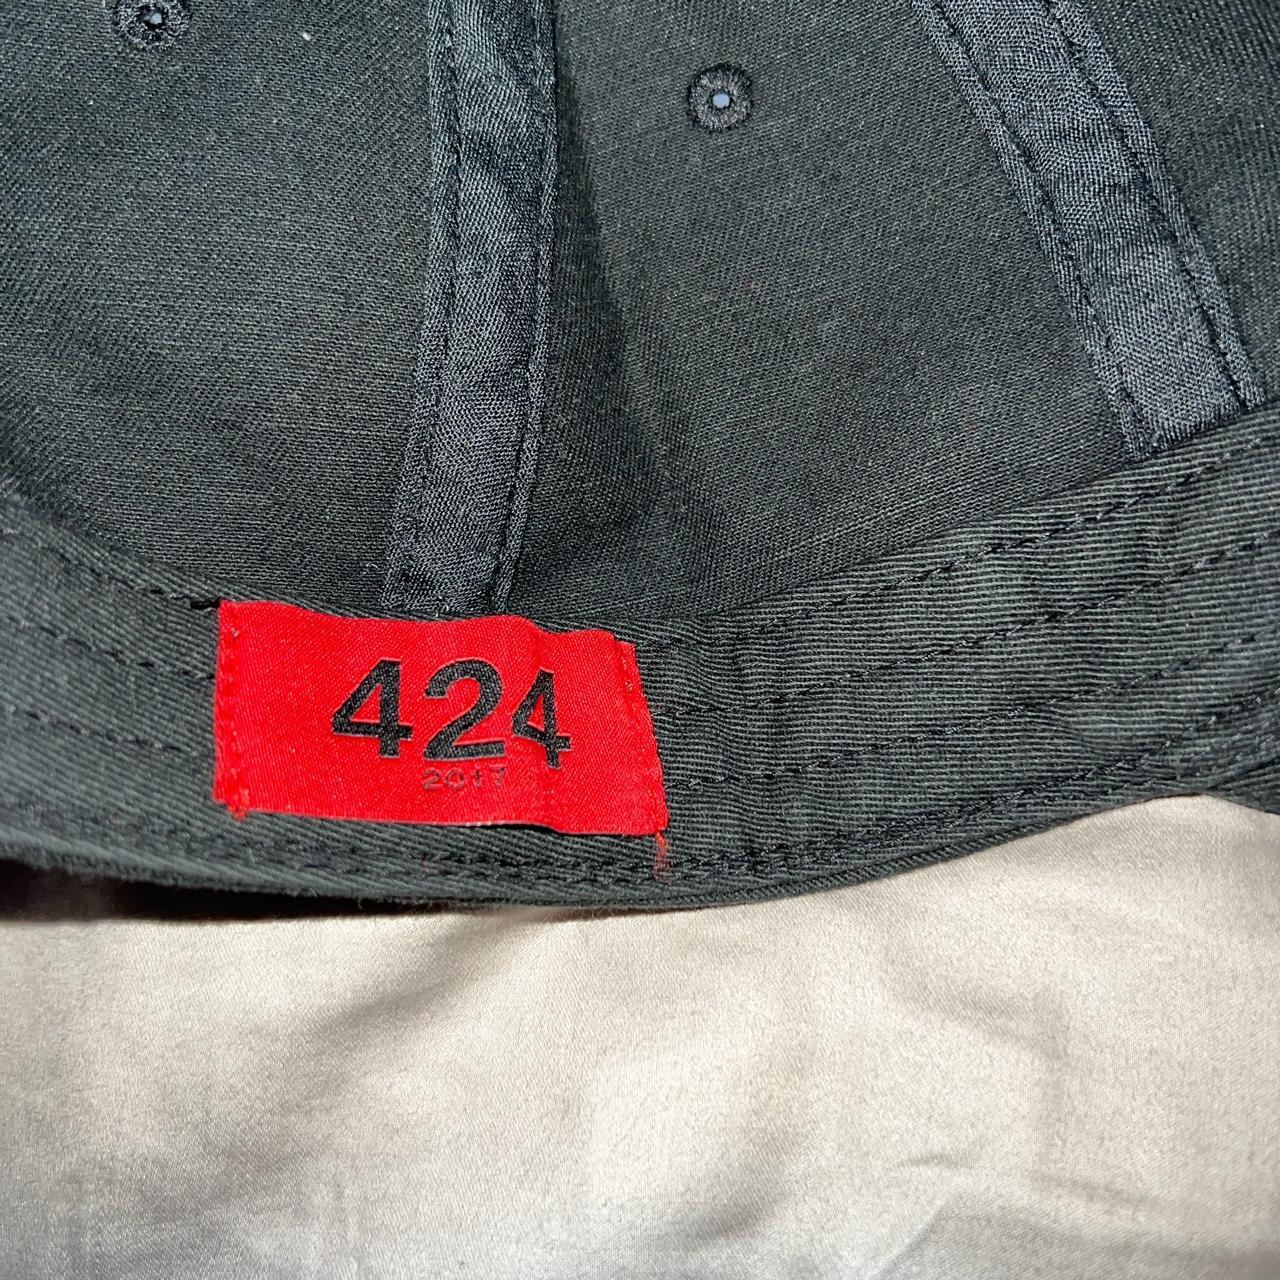 Product Image 3 - 424 dad cap
Pre owned 
No